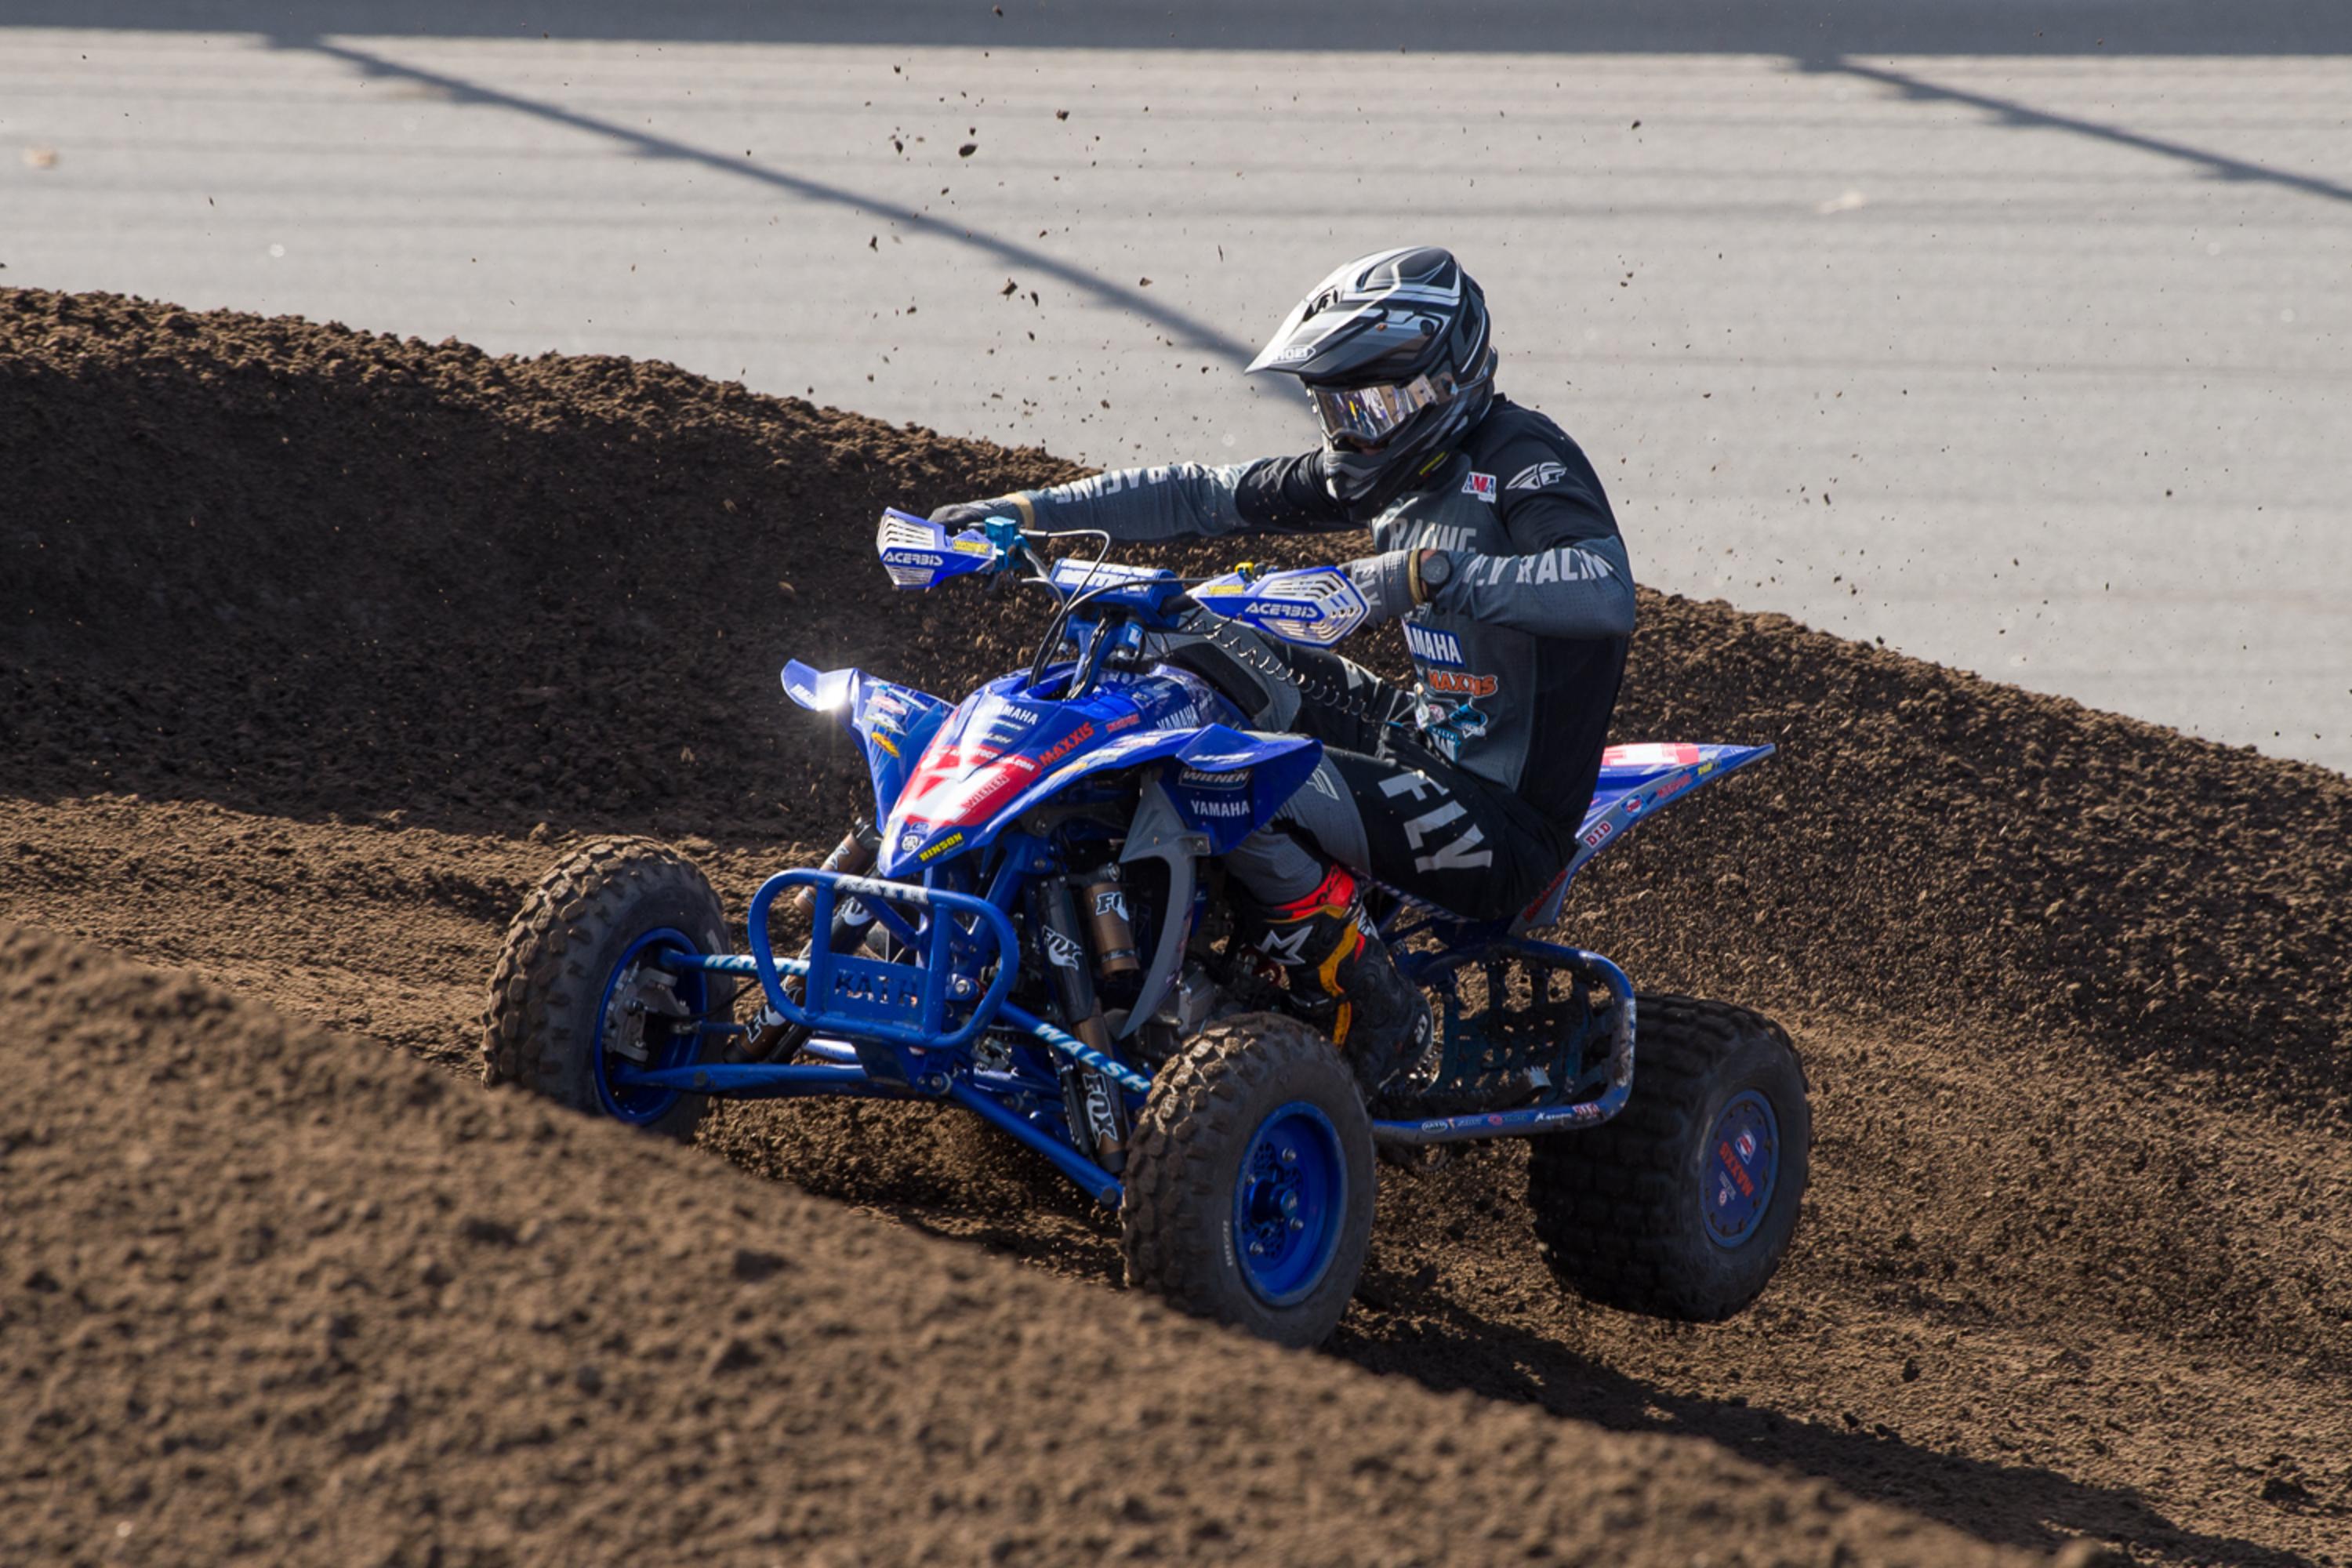 ATV Motocross Heads to The Lone Star State This Weekend